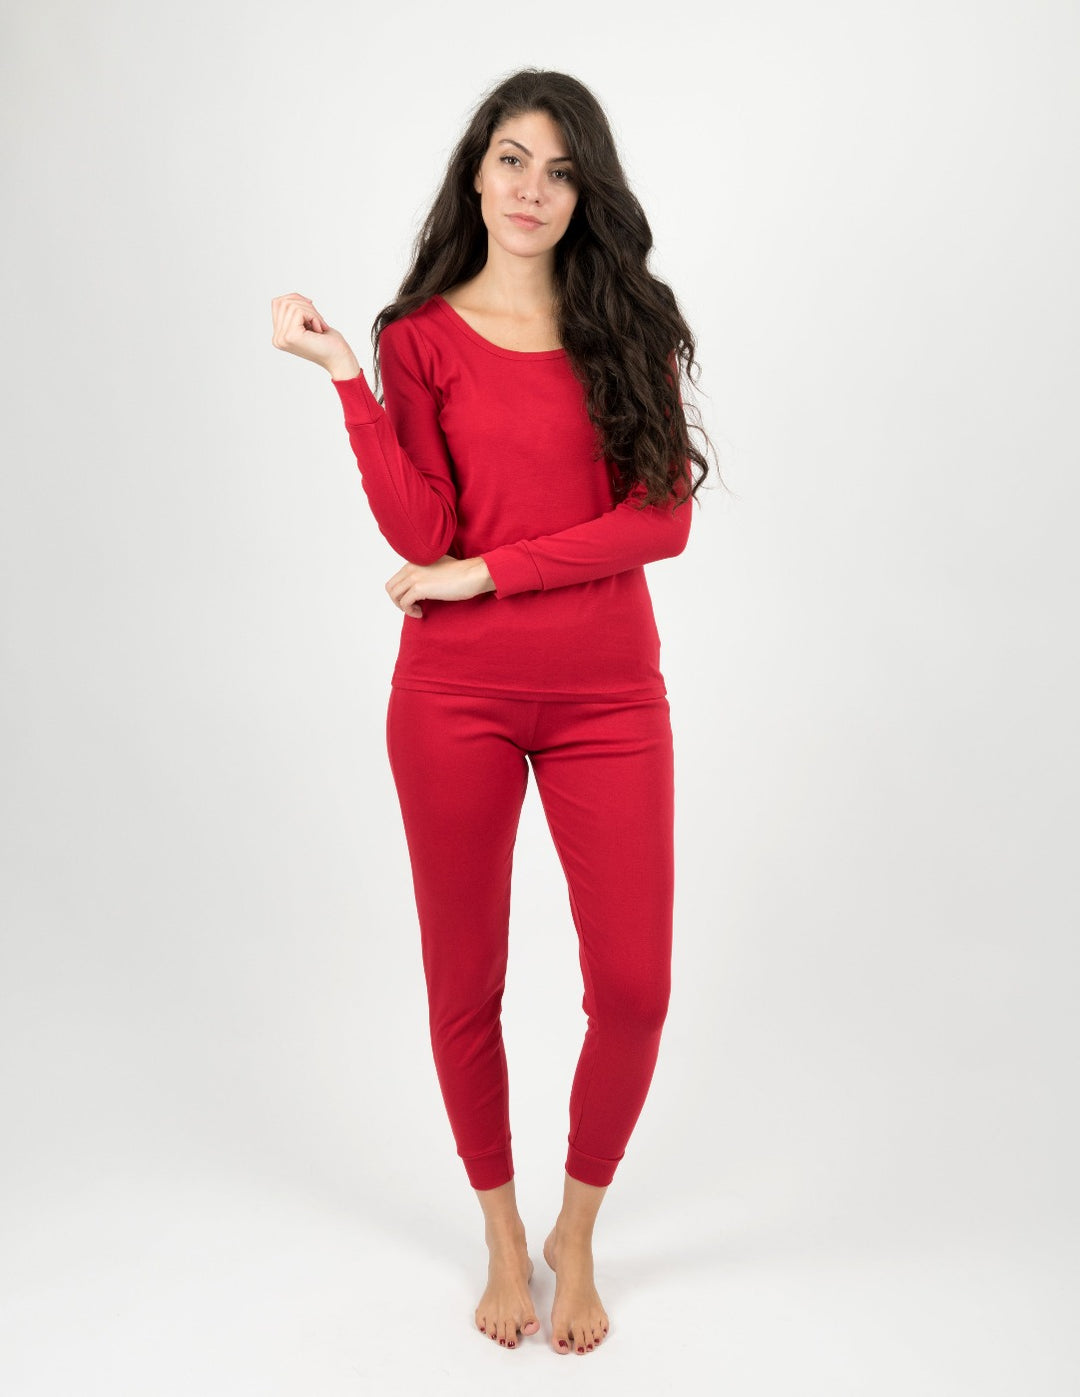 Women's Solid Red Pajamas